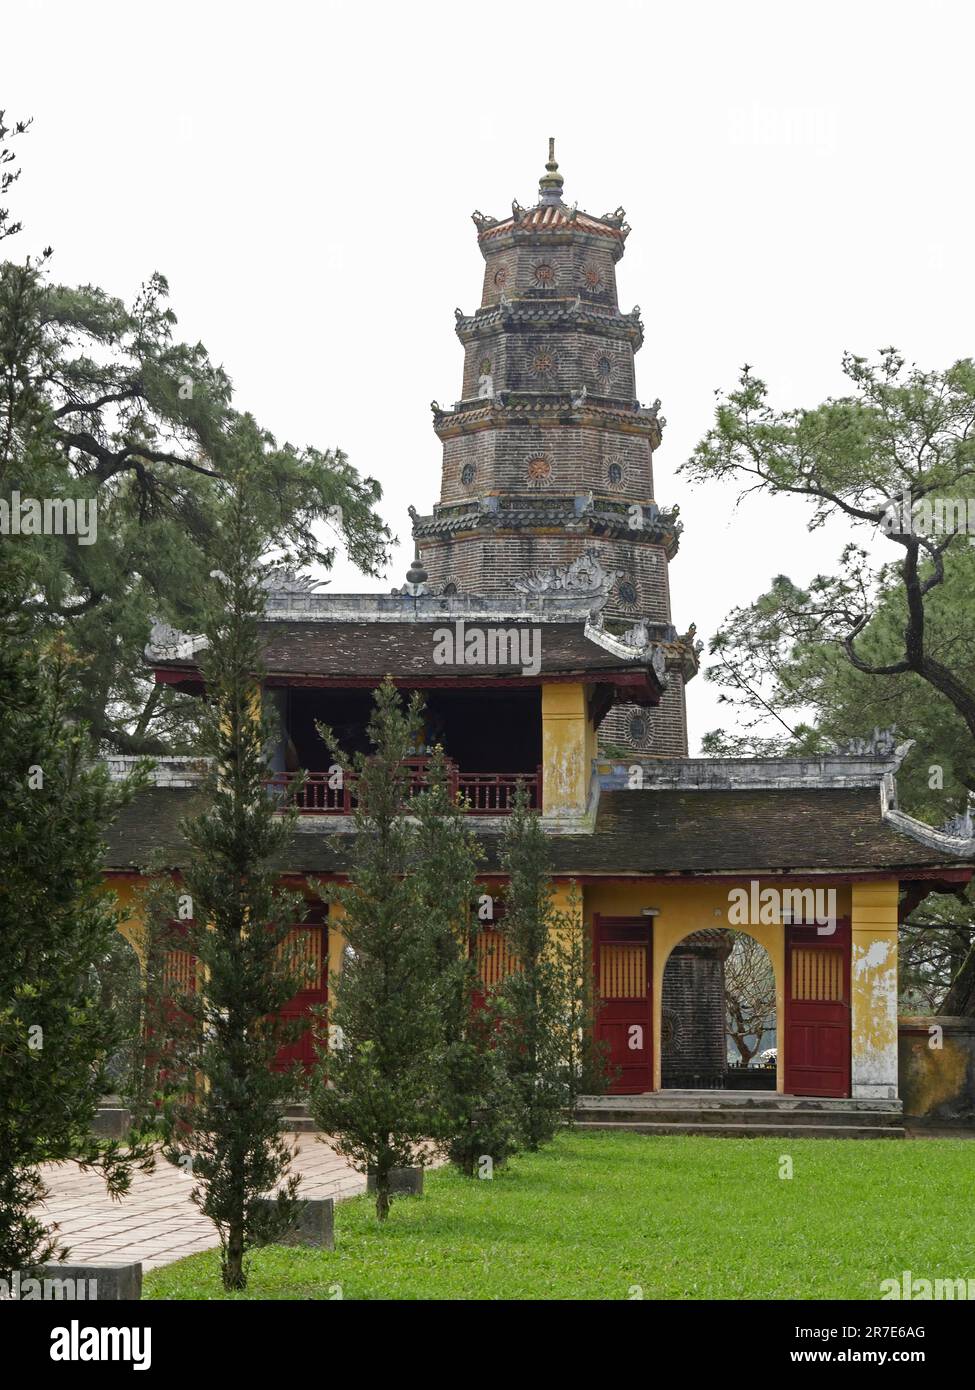 Vietnam, Thua Thien Hue Province, Hue City, listed at World Heritage site by Unesco, Forbidden City or Purple City in the Heart of Imperial City, Thie Stock Photo